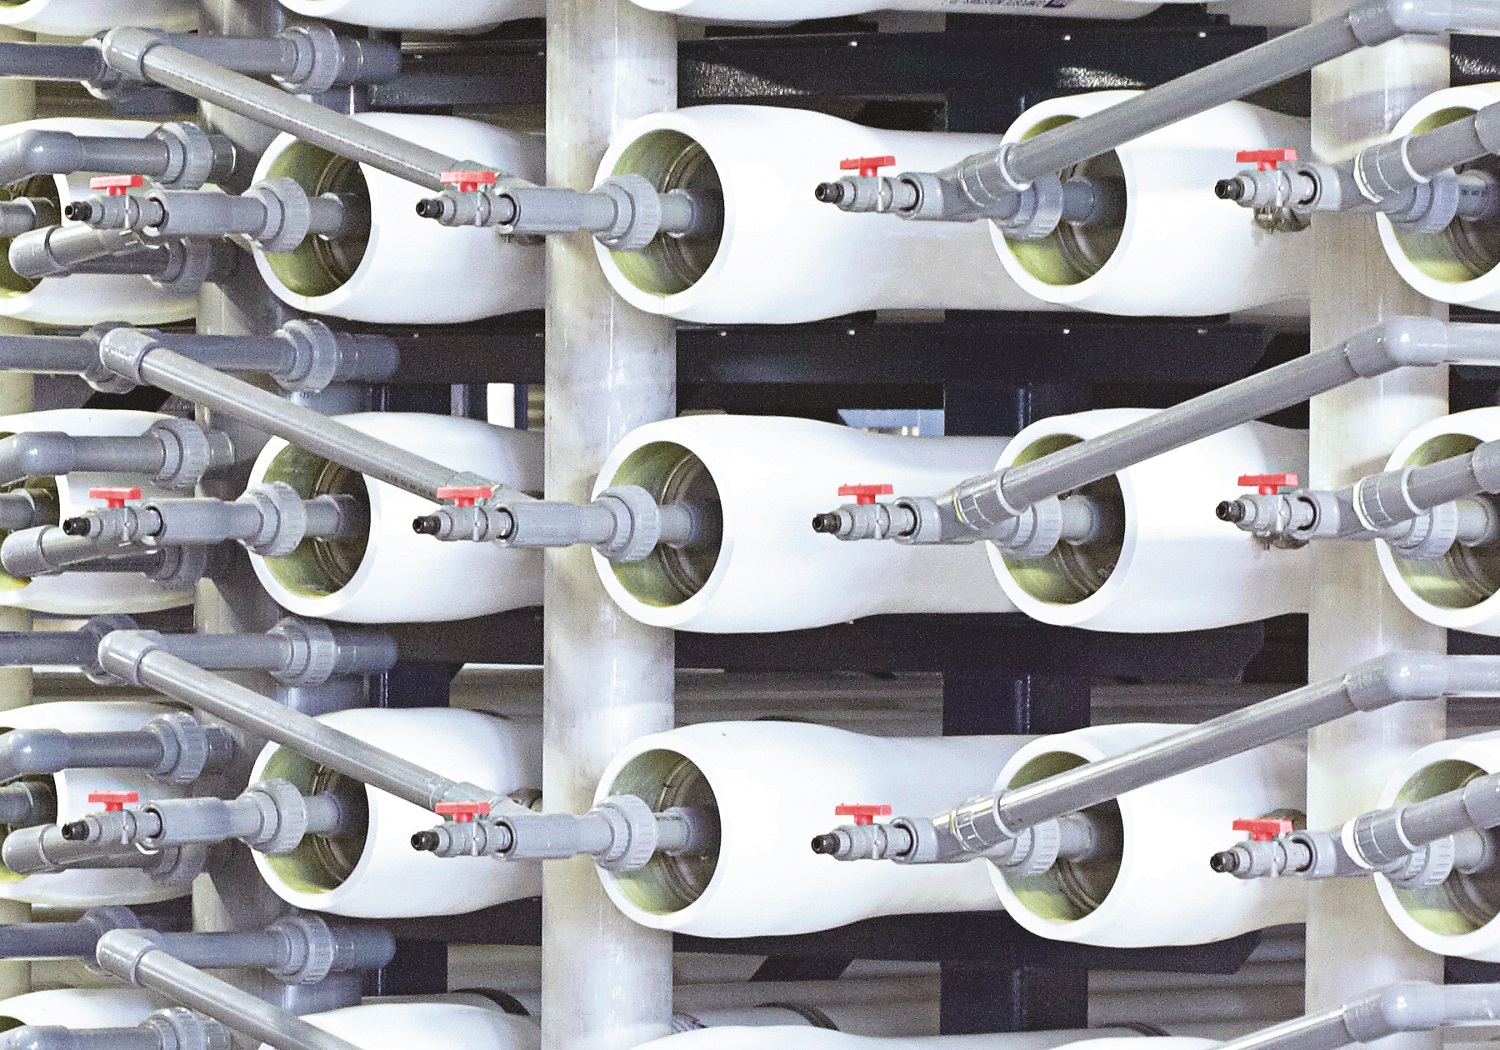 Electricity accounts for around 50% of the operational costs of a desalination plant, so energy efficiency and life cycle cost optimisation are critical challenges. (Image: ABB)